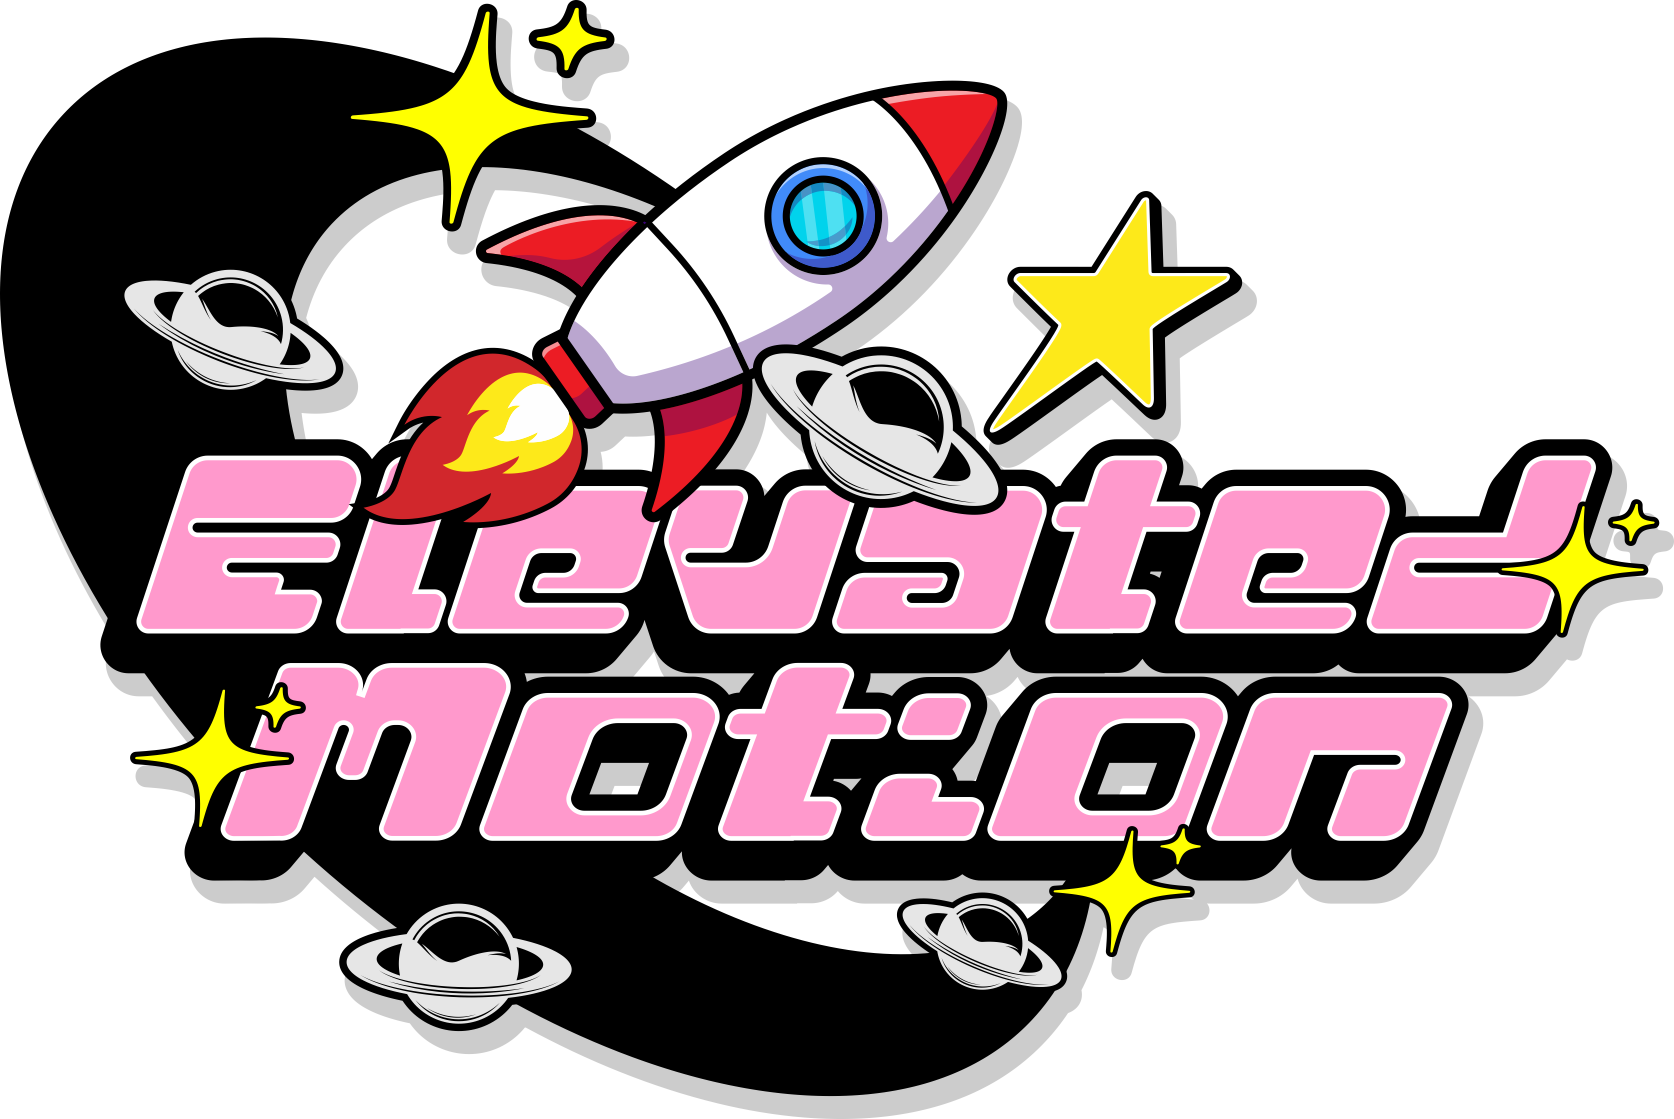 Elevated Motion